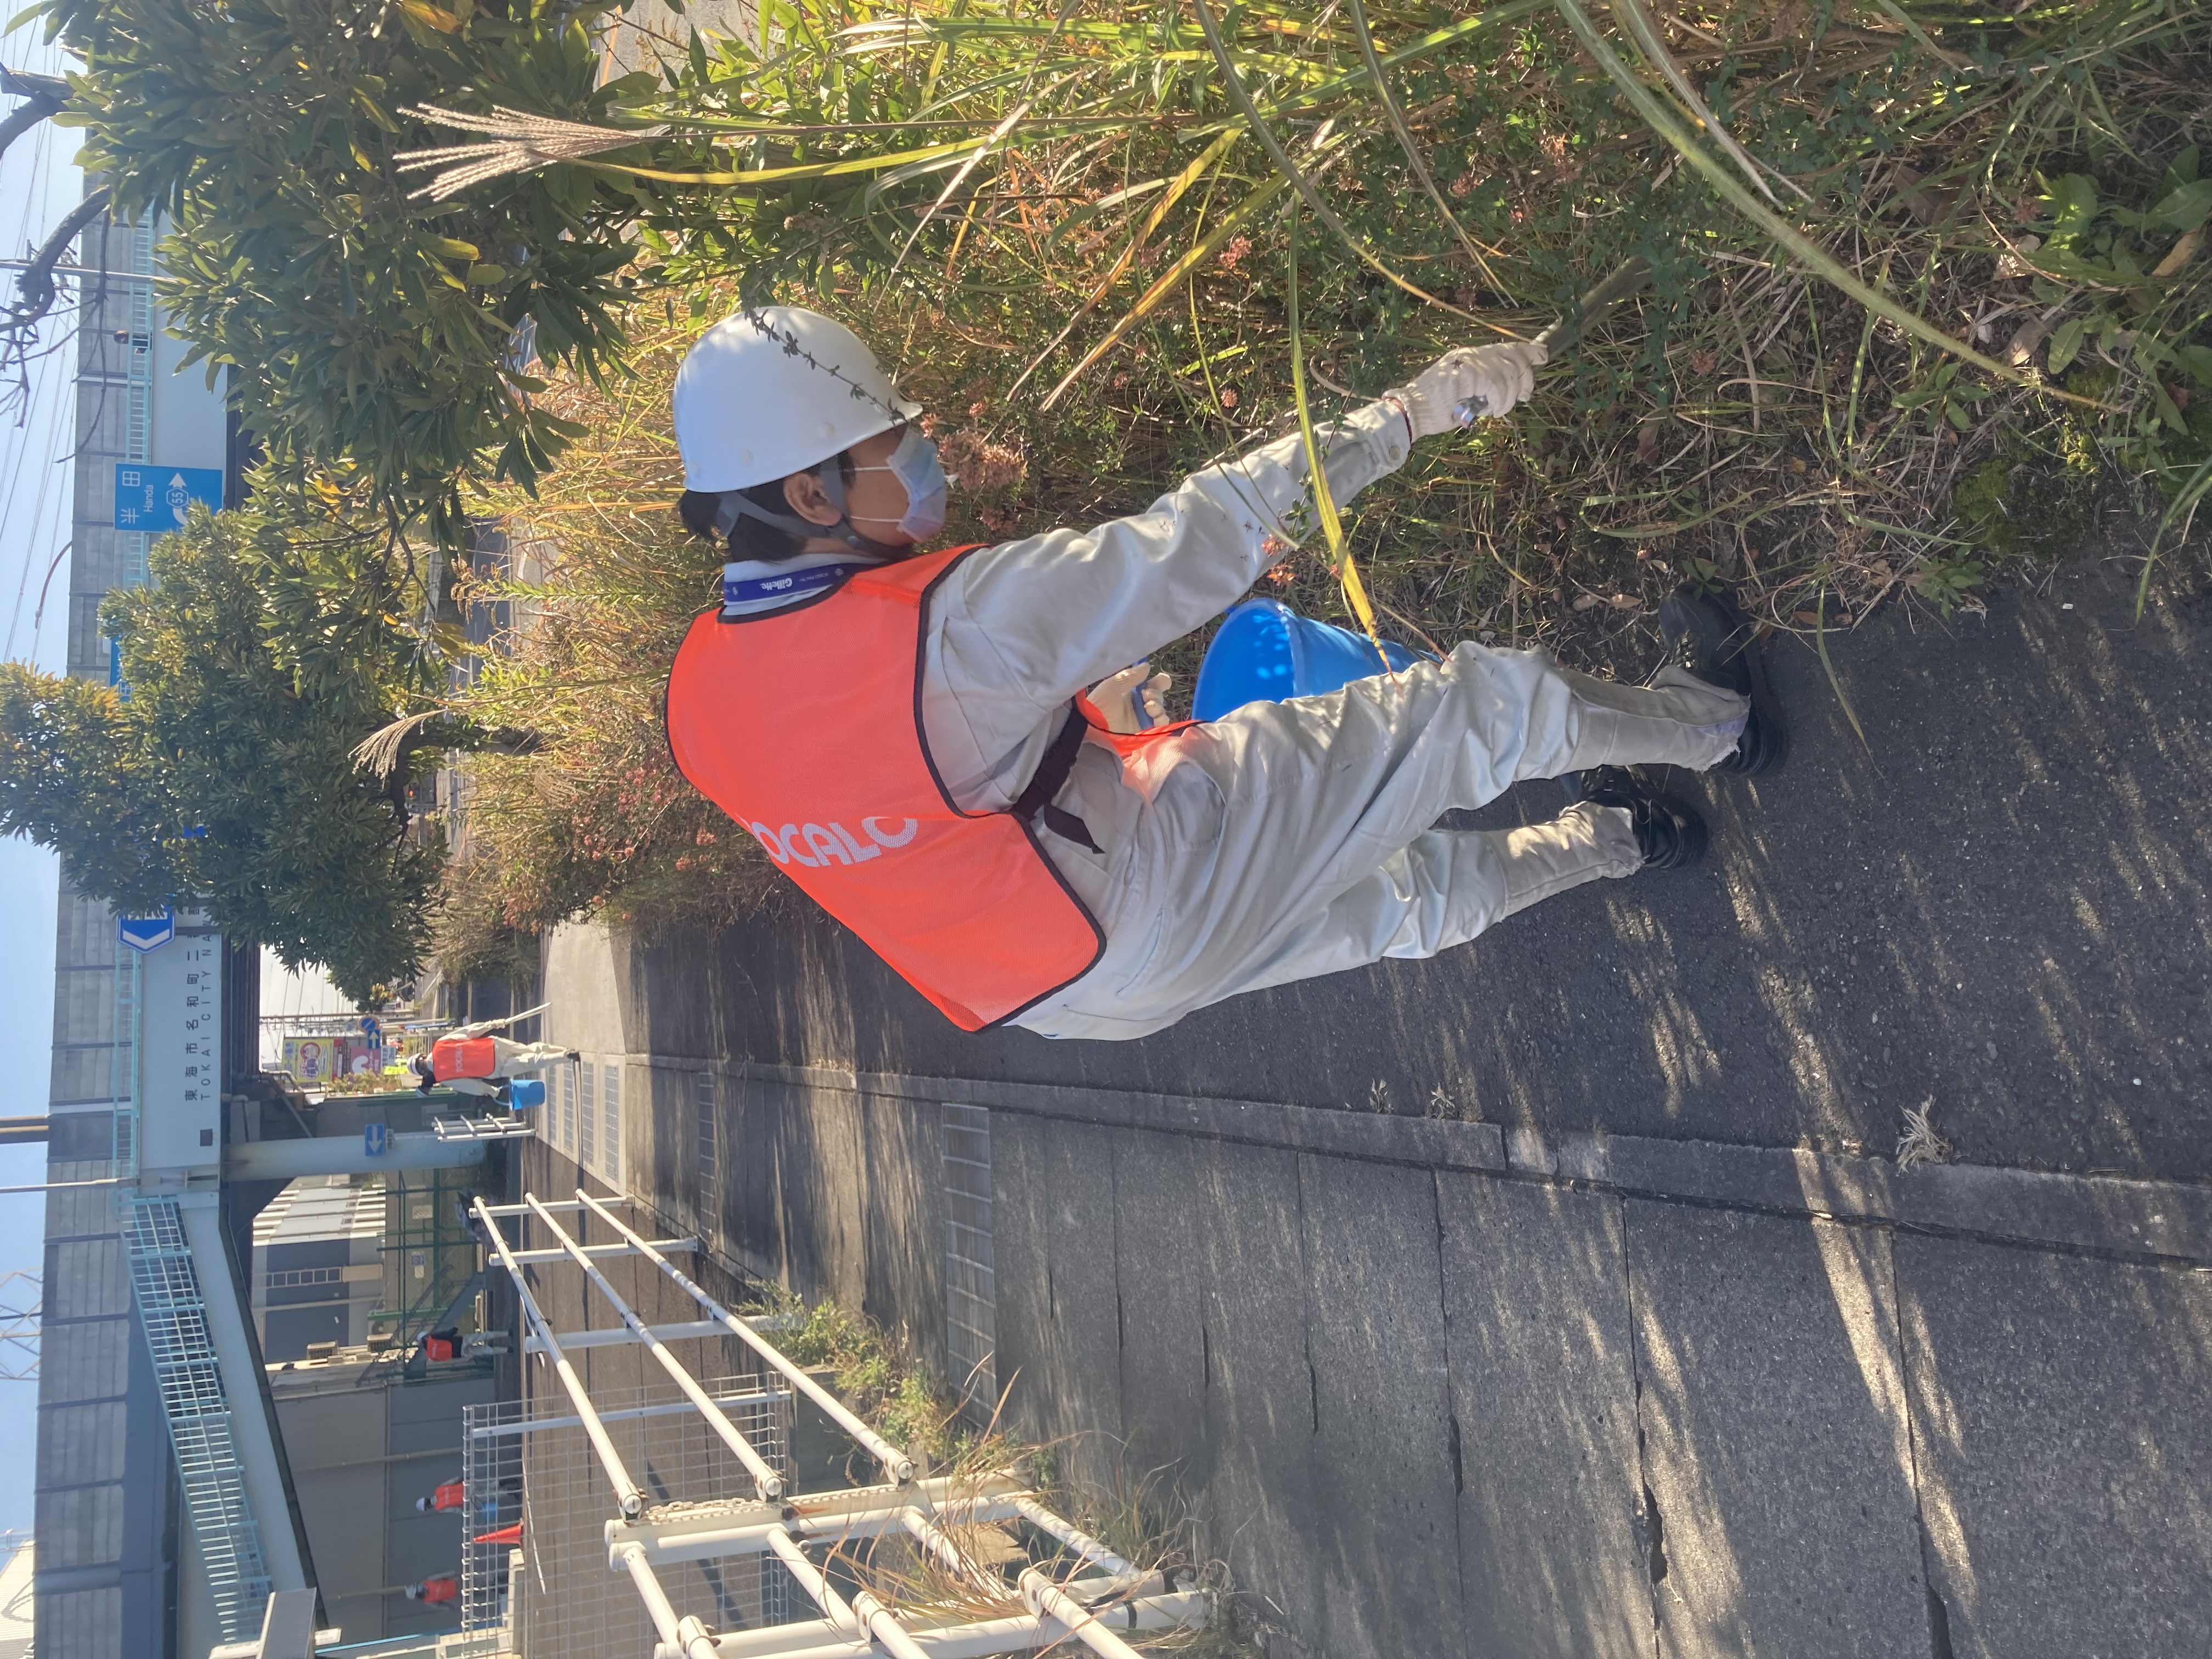 Cleanup activities near the Nagoya Plant